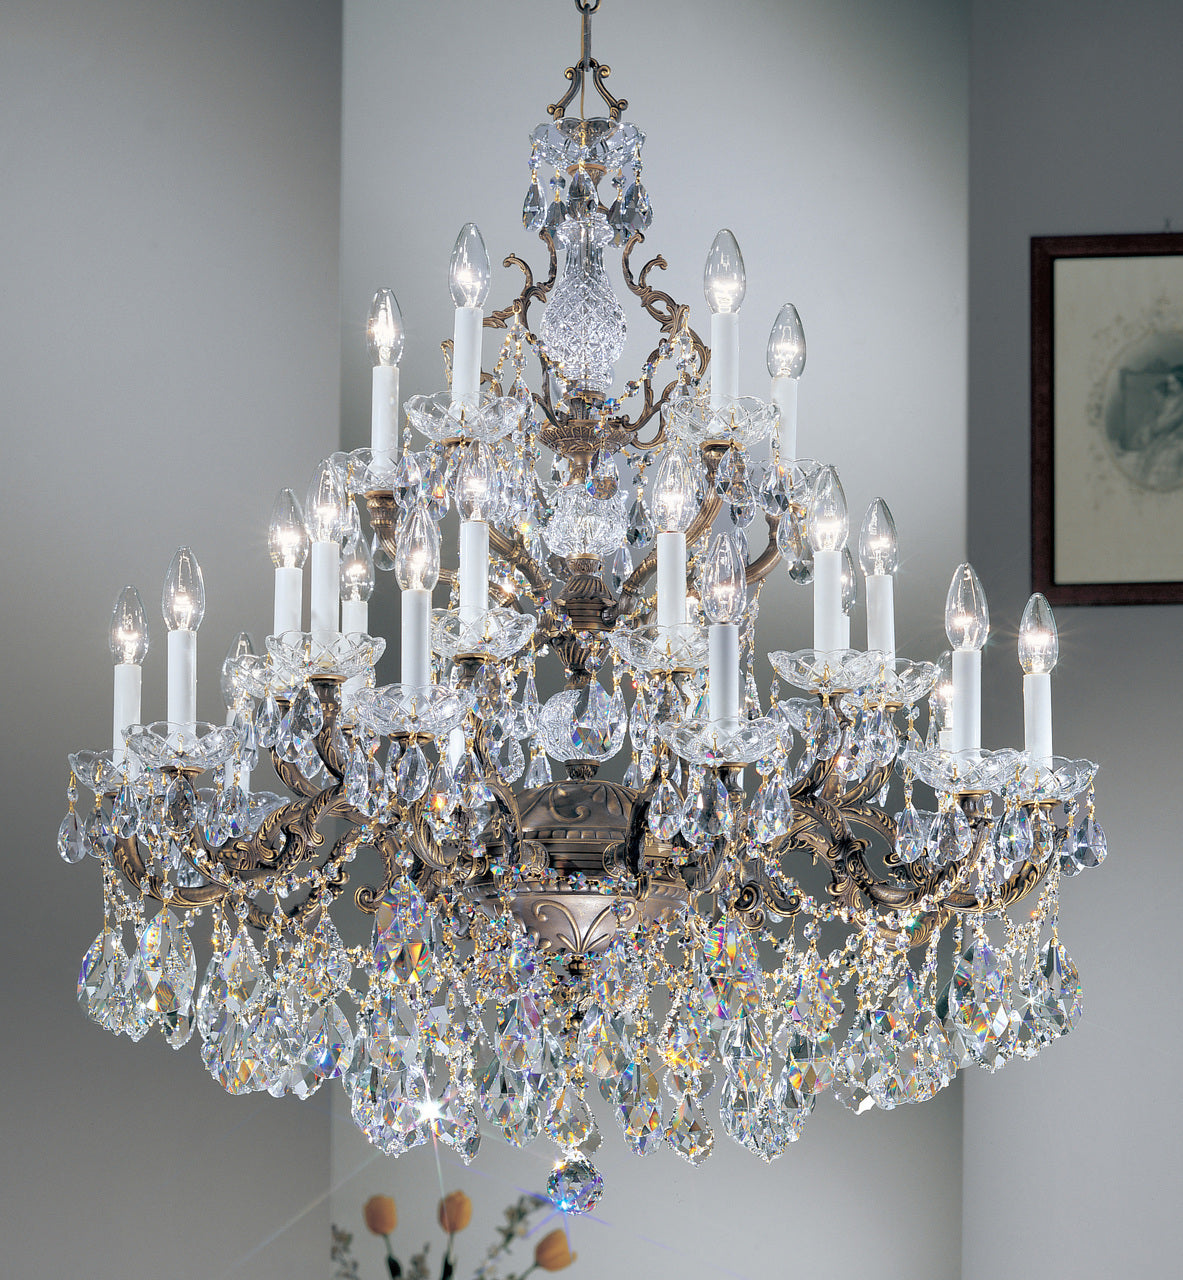 Classic Lighting 5545 OWB SC Madrid Imperial Crystal/Cast Brass Chandelier in Olde World Bronze (Imported from Spain)